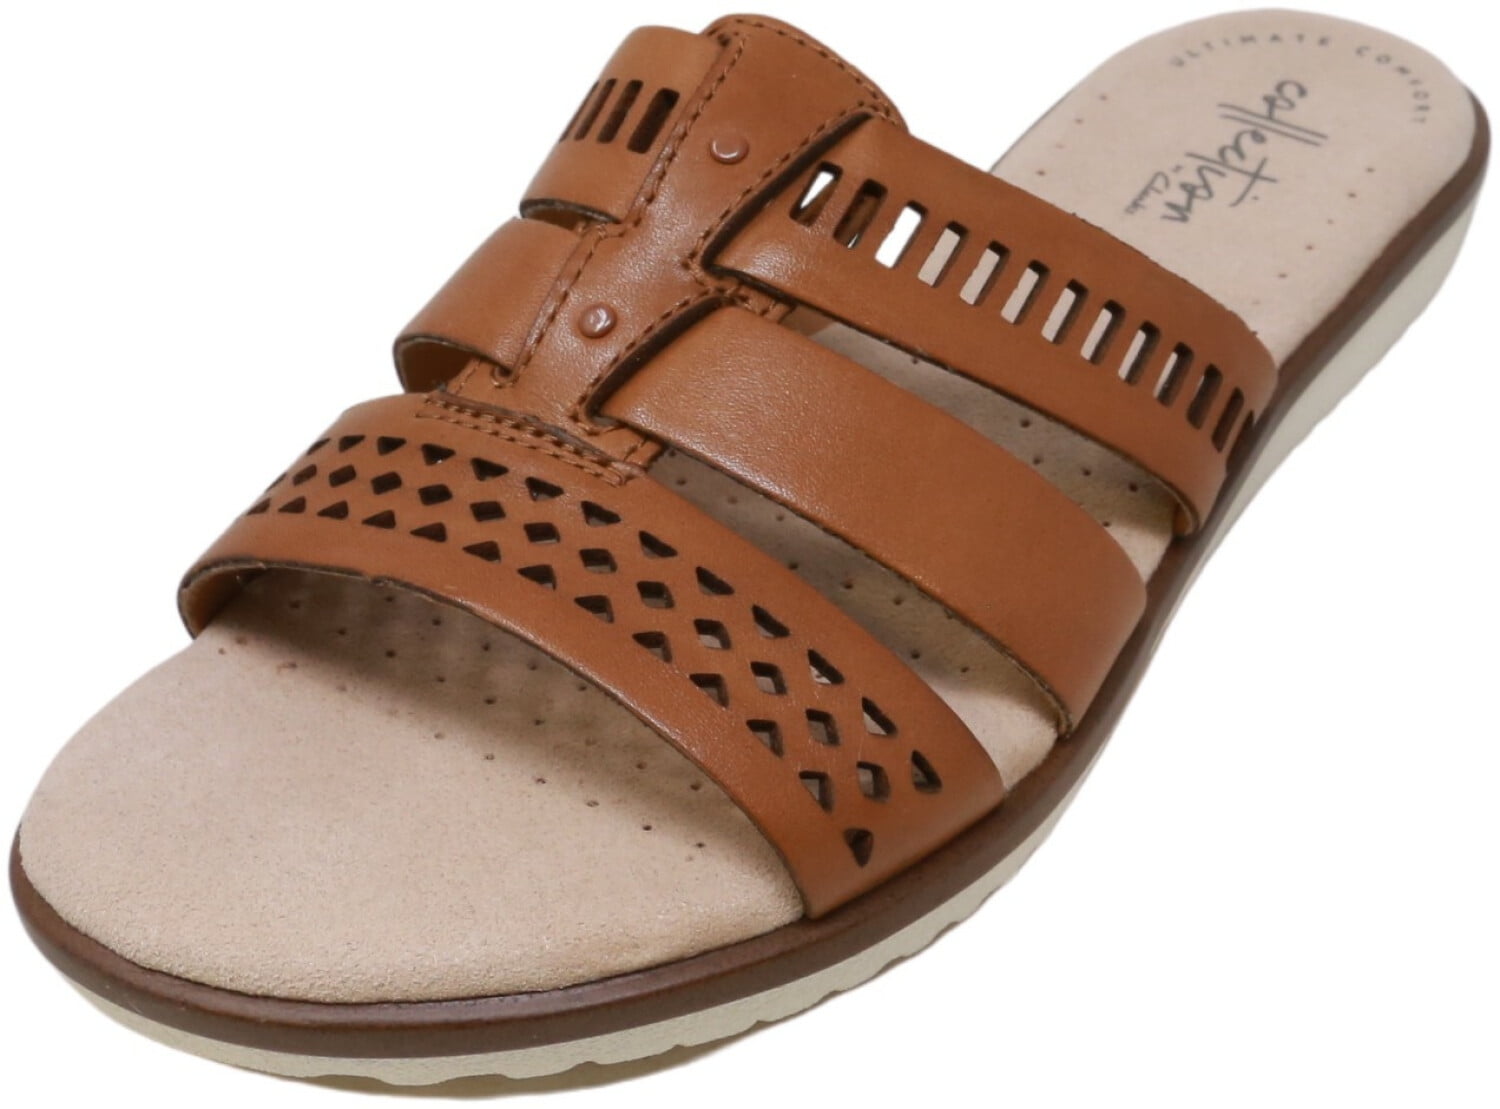 clarks sandals sears canada